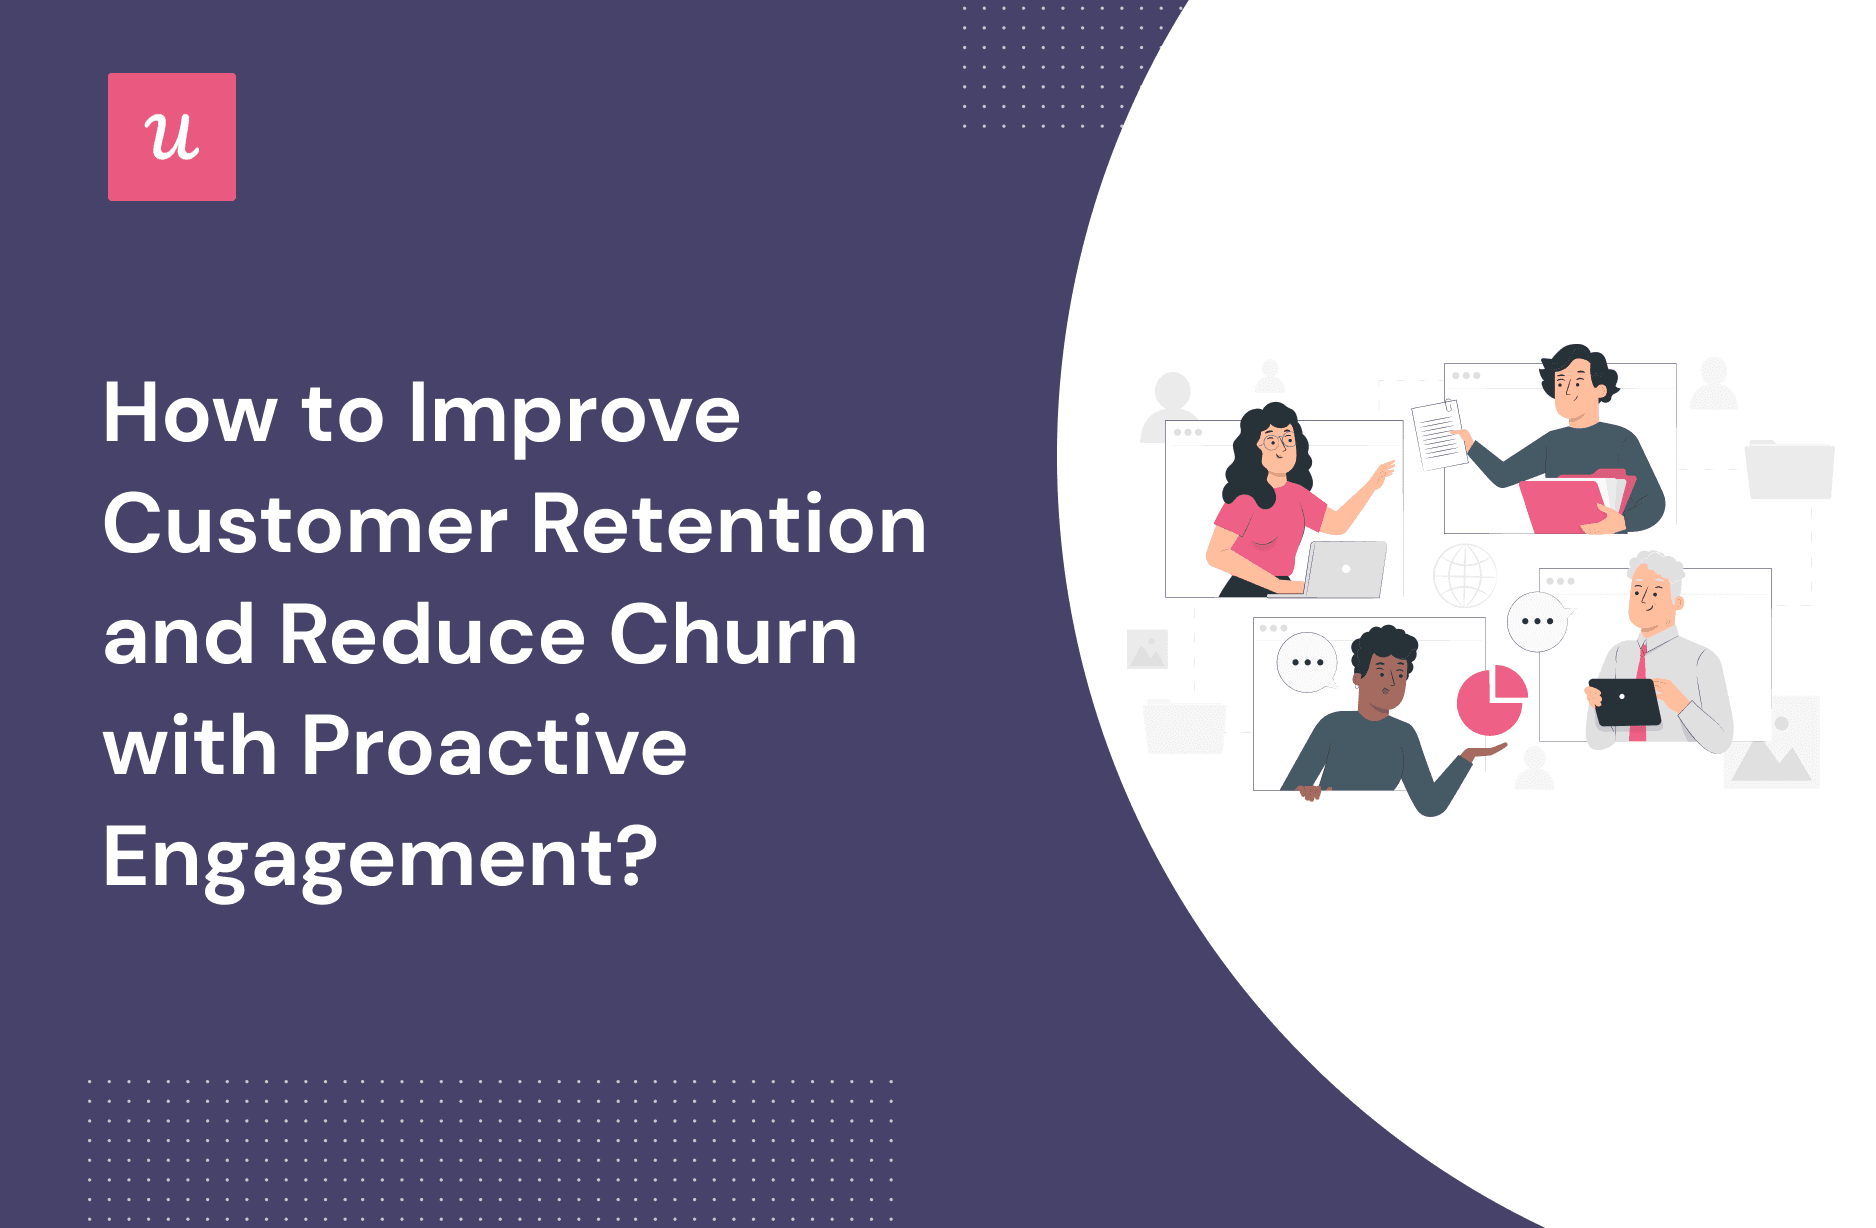 How To Improve Customer Retention and Reduce Churn With Proactive Engagement?